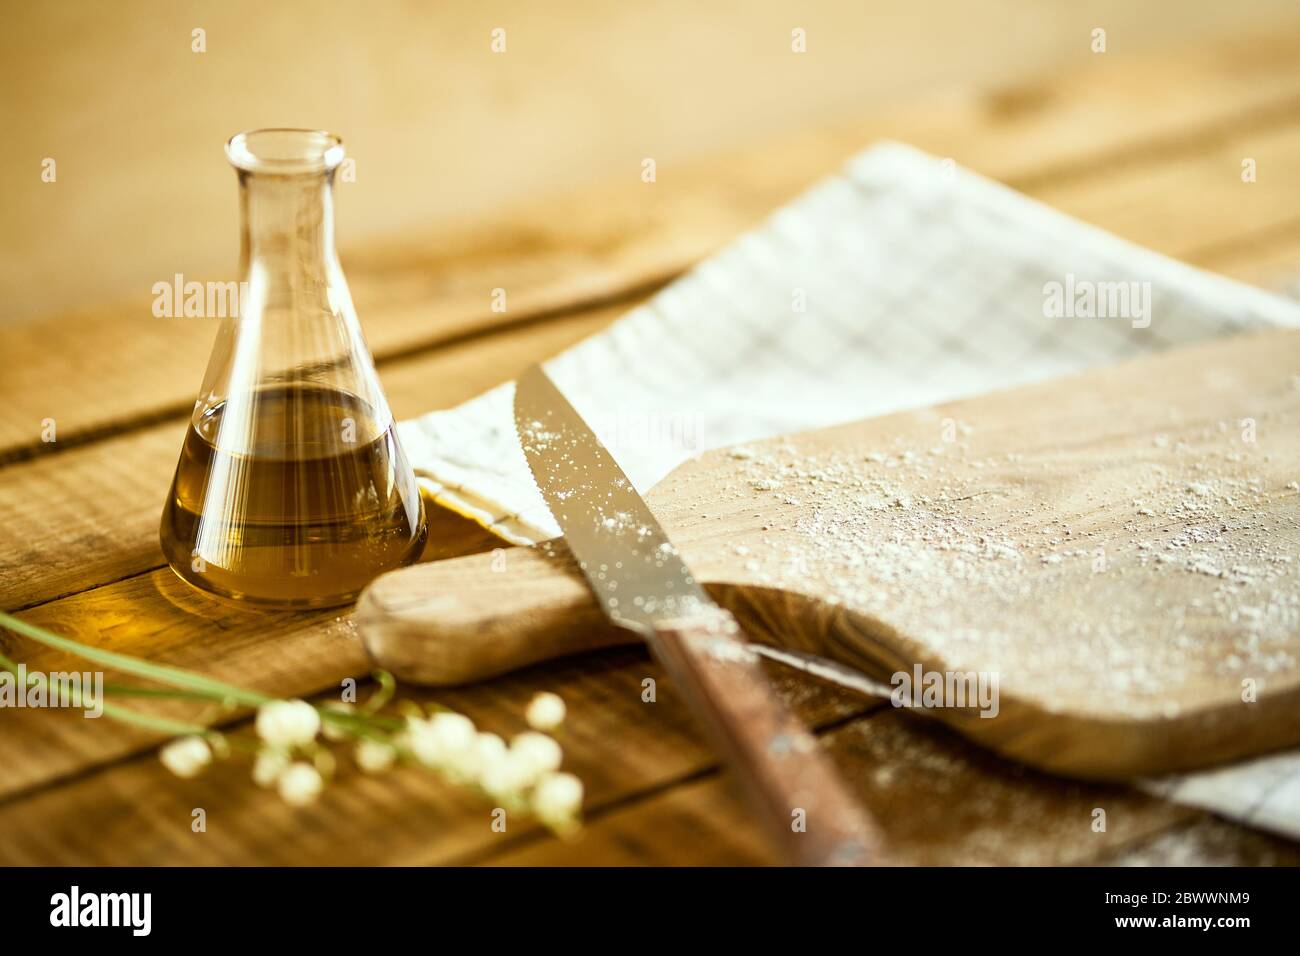 olive oil, knife and cutting board on wooden table Stock Photo